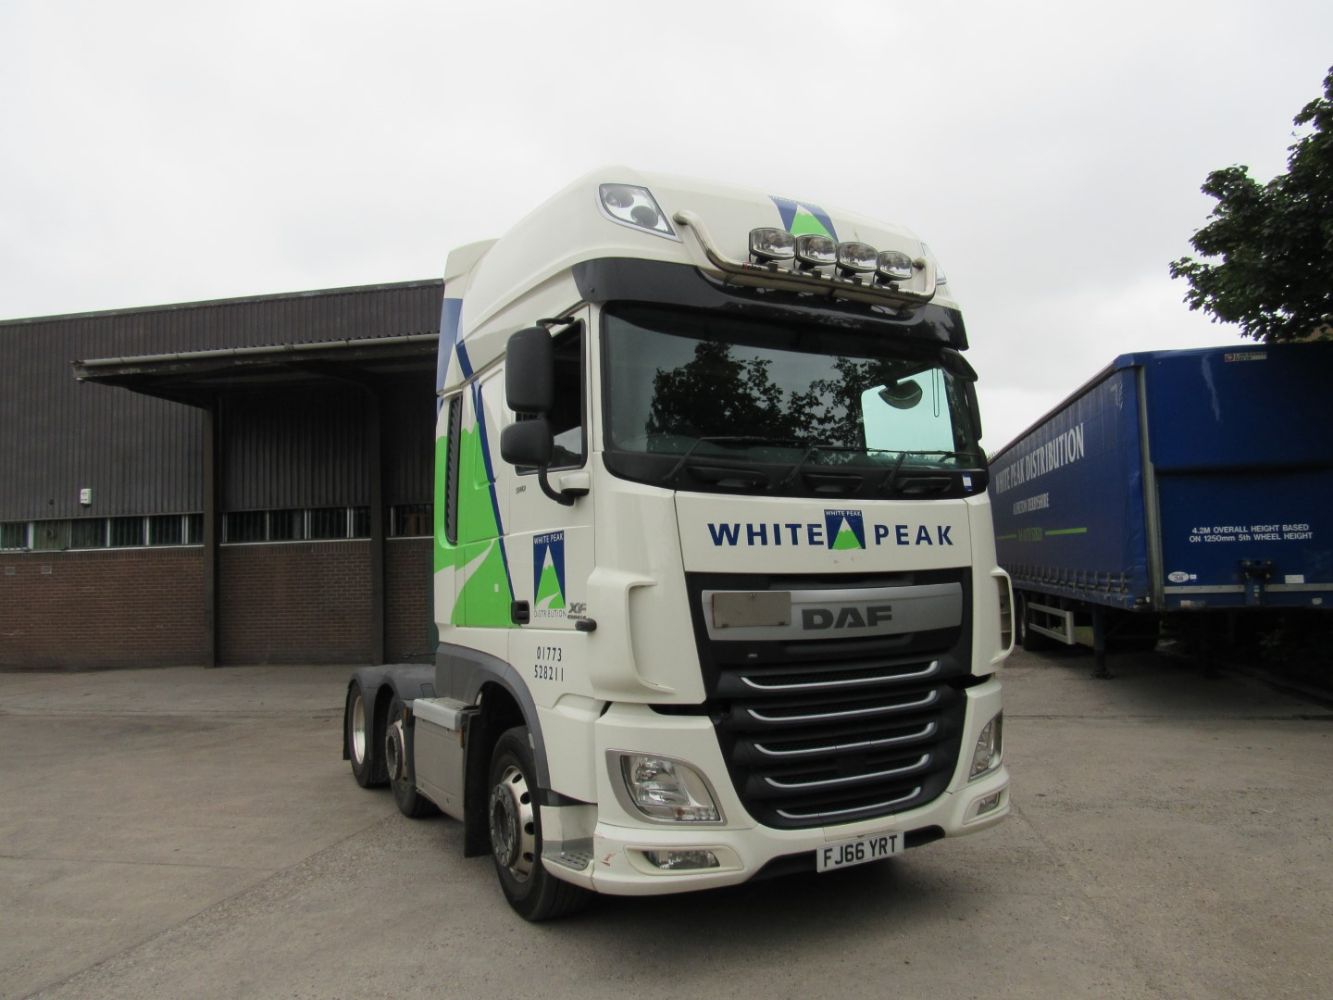 Commercial Vehicle Fleet including DAF Tractor Units, Rigid Units, Drags and Curtain Sided Trailers, Forklift Trucks and Racking